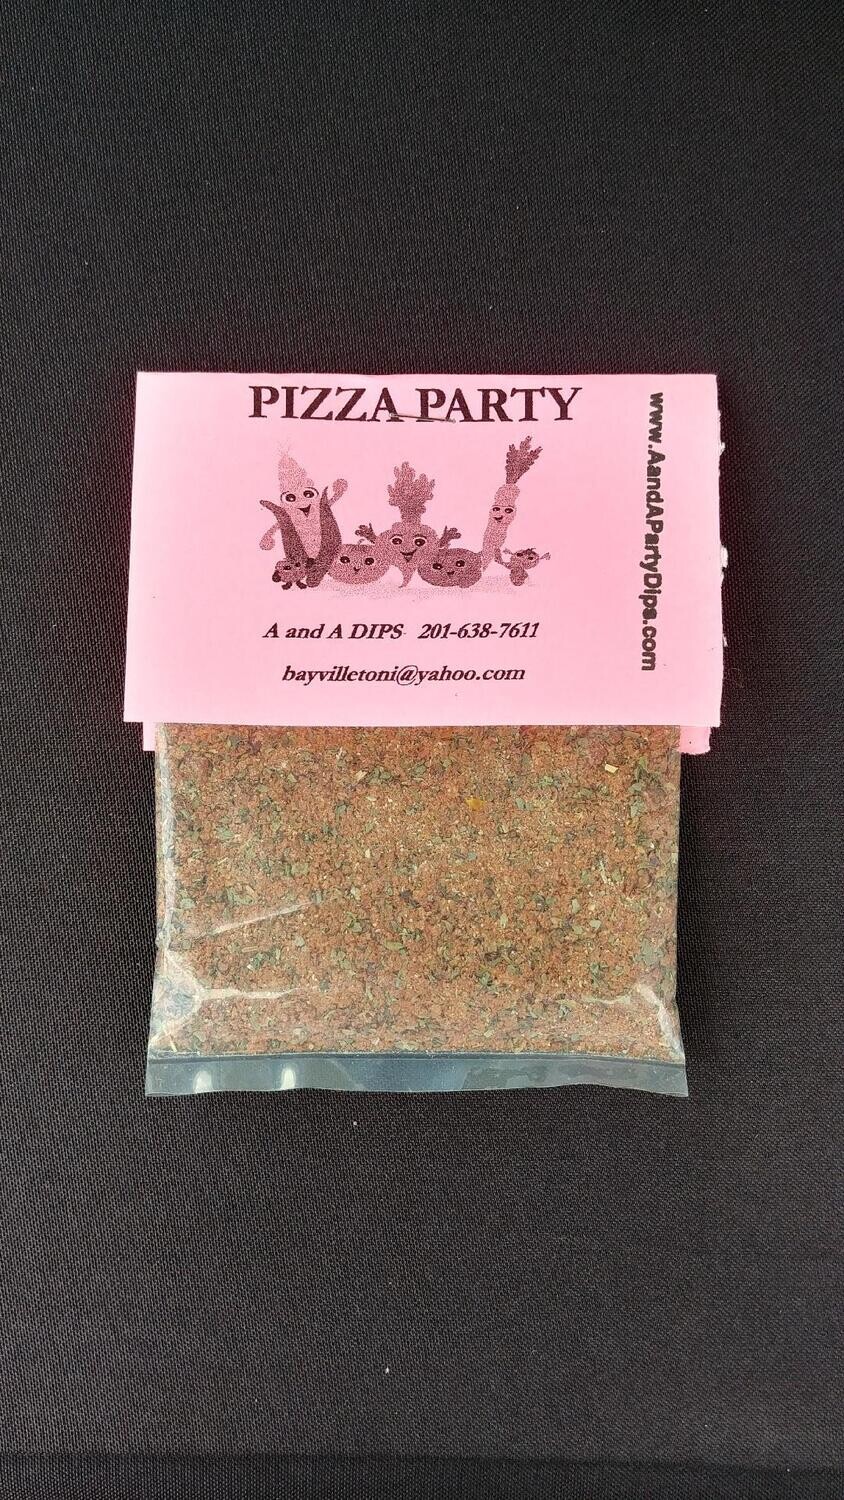 Code　Secret　PARTY　PIZZA　Dips　AA　Party